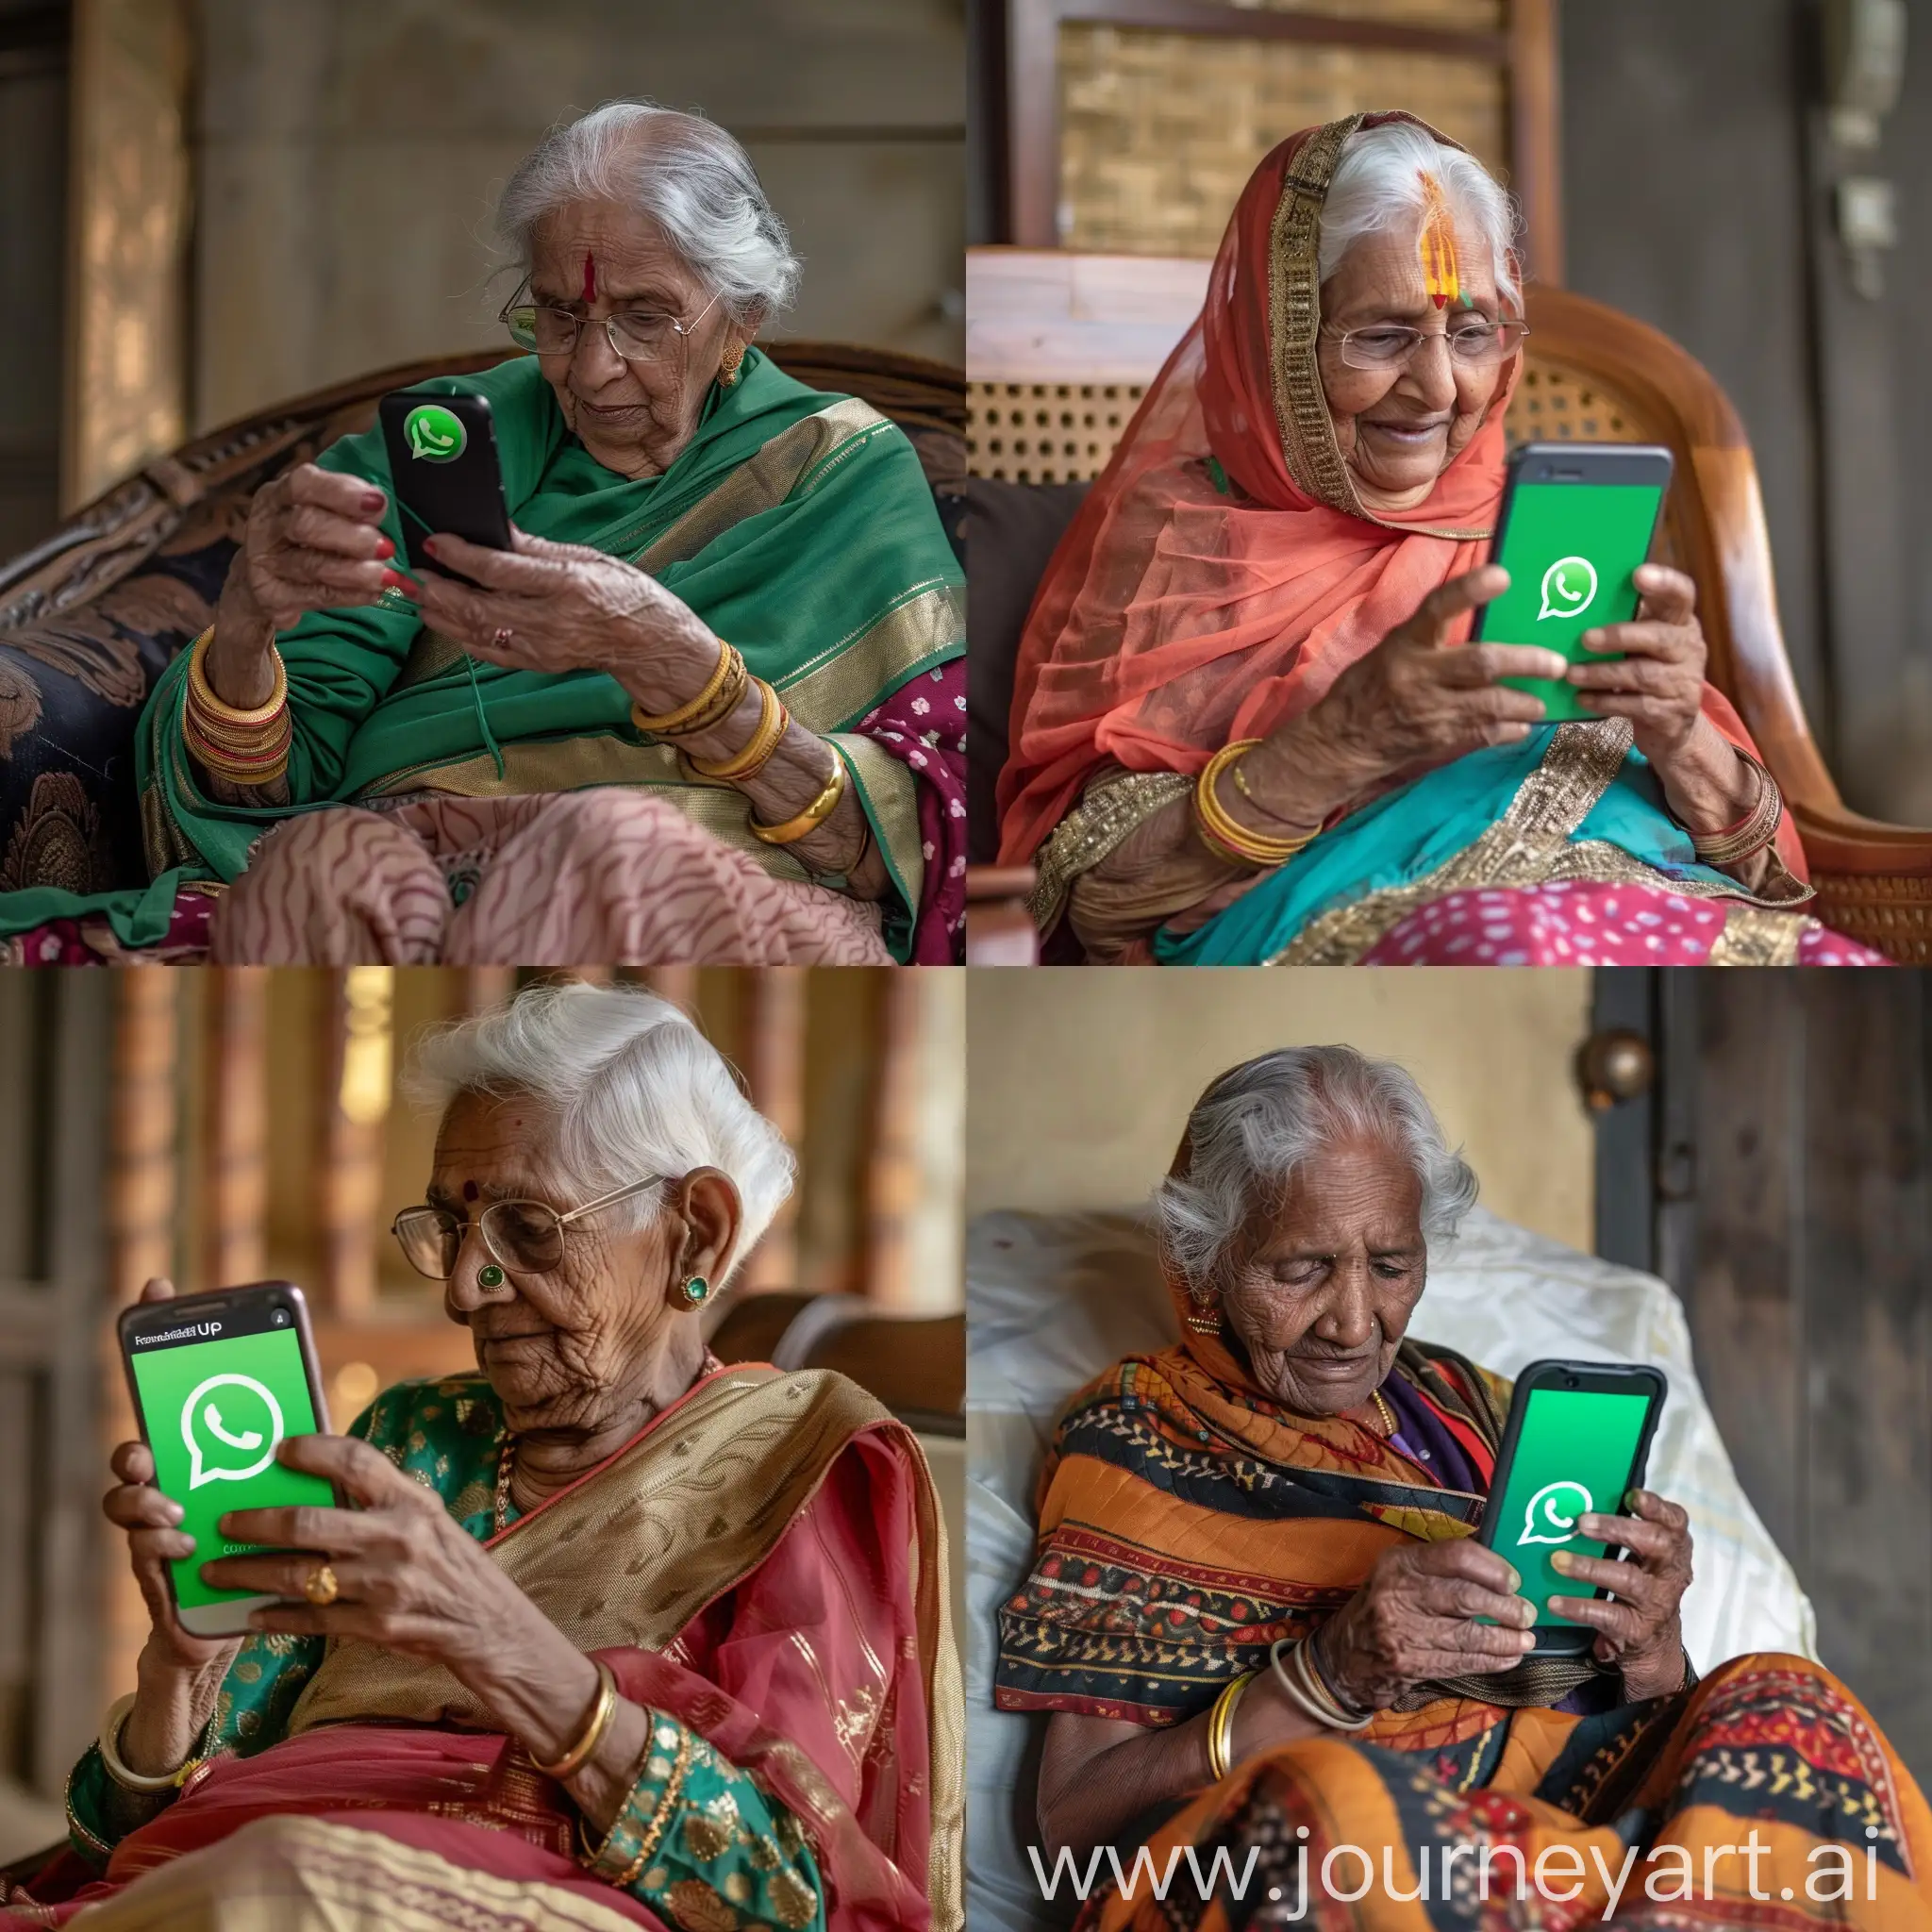 An image where old indian grandmother is using Whatsapp UPI